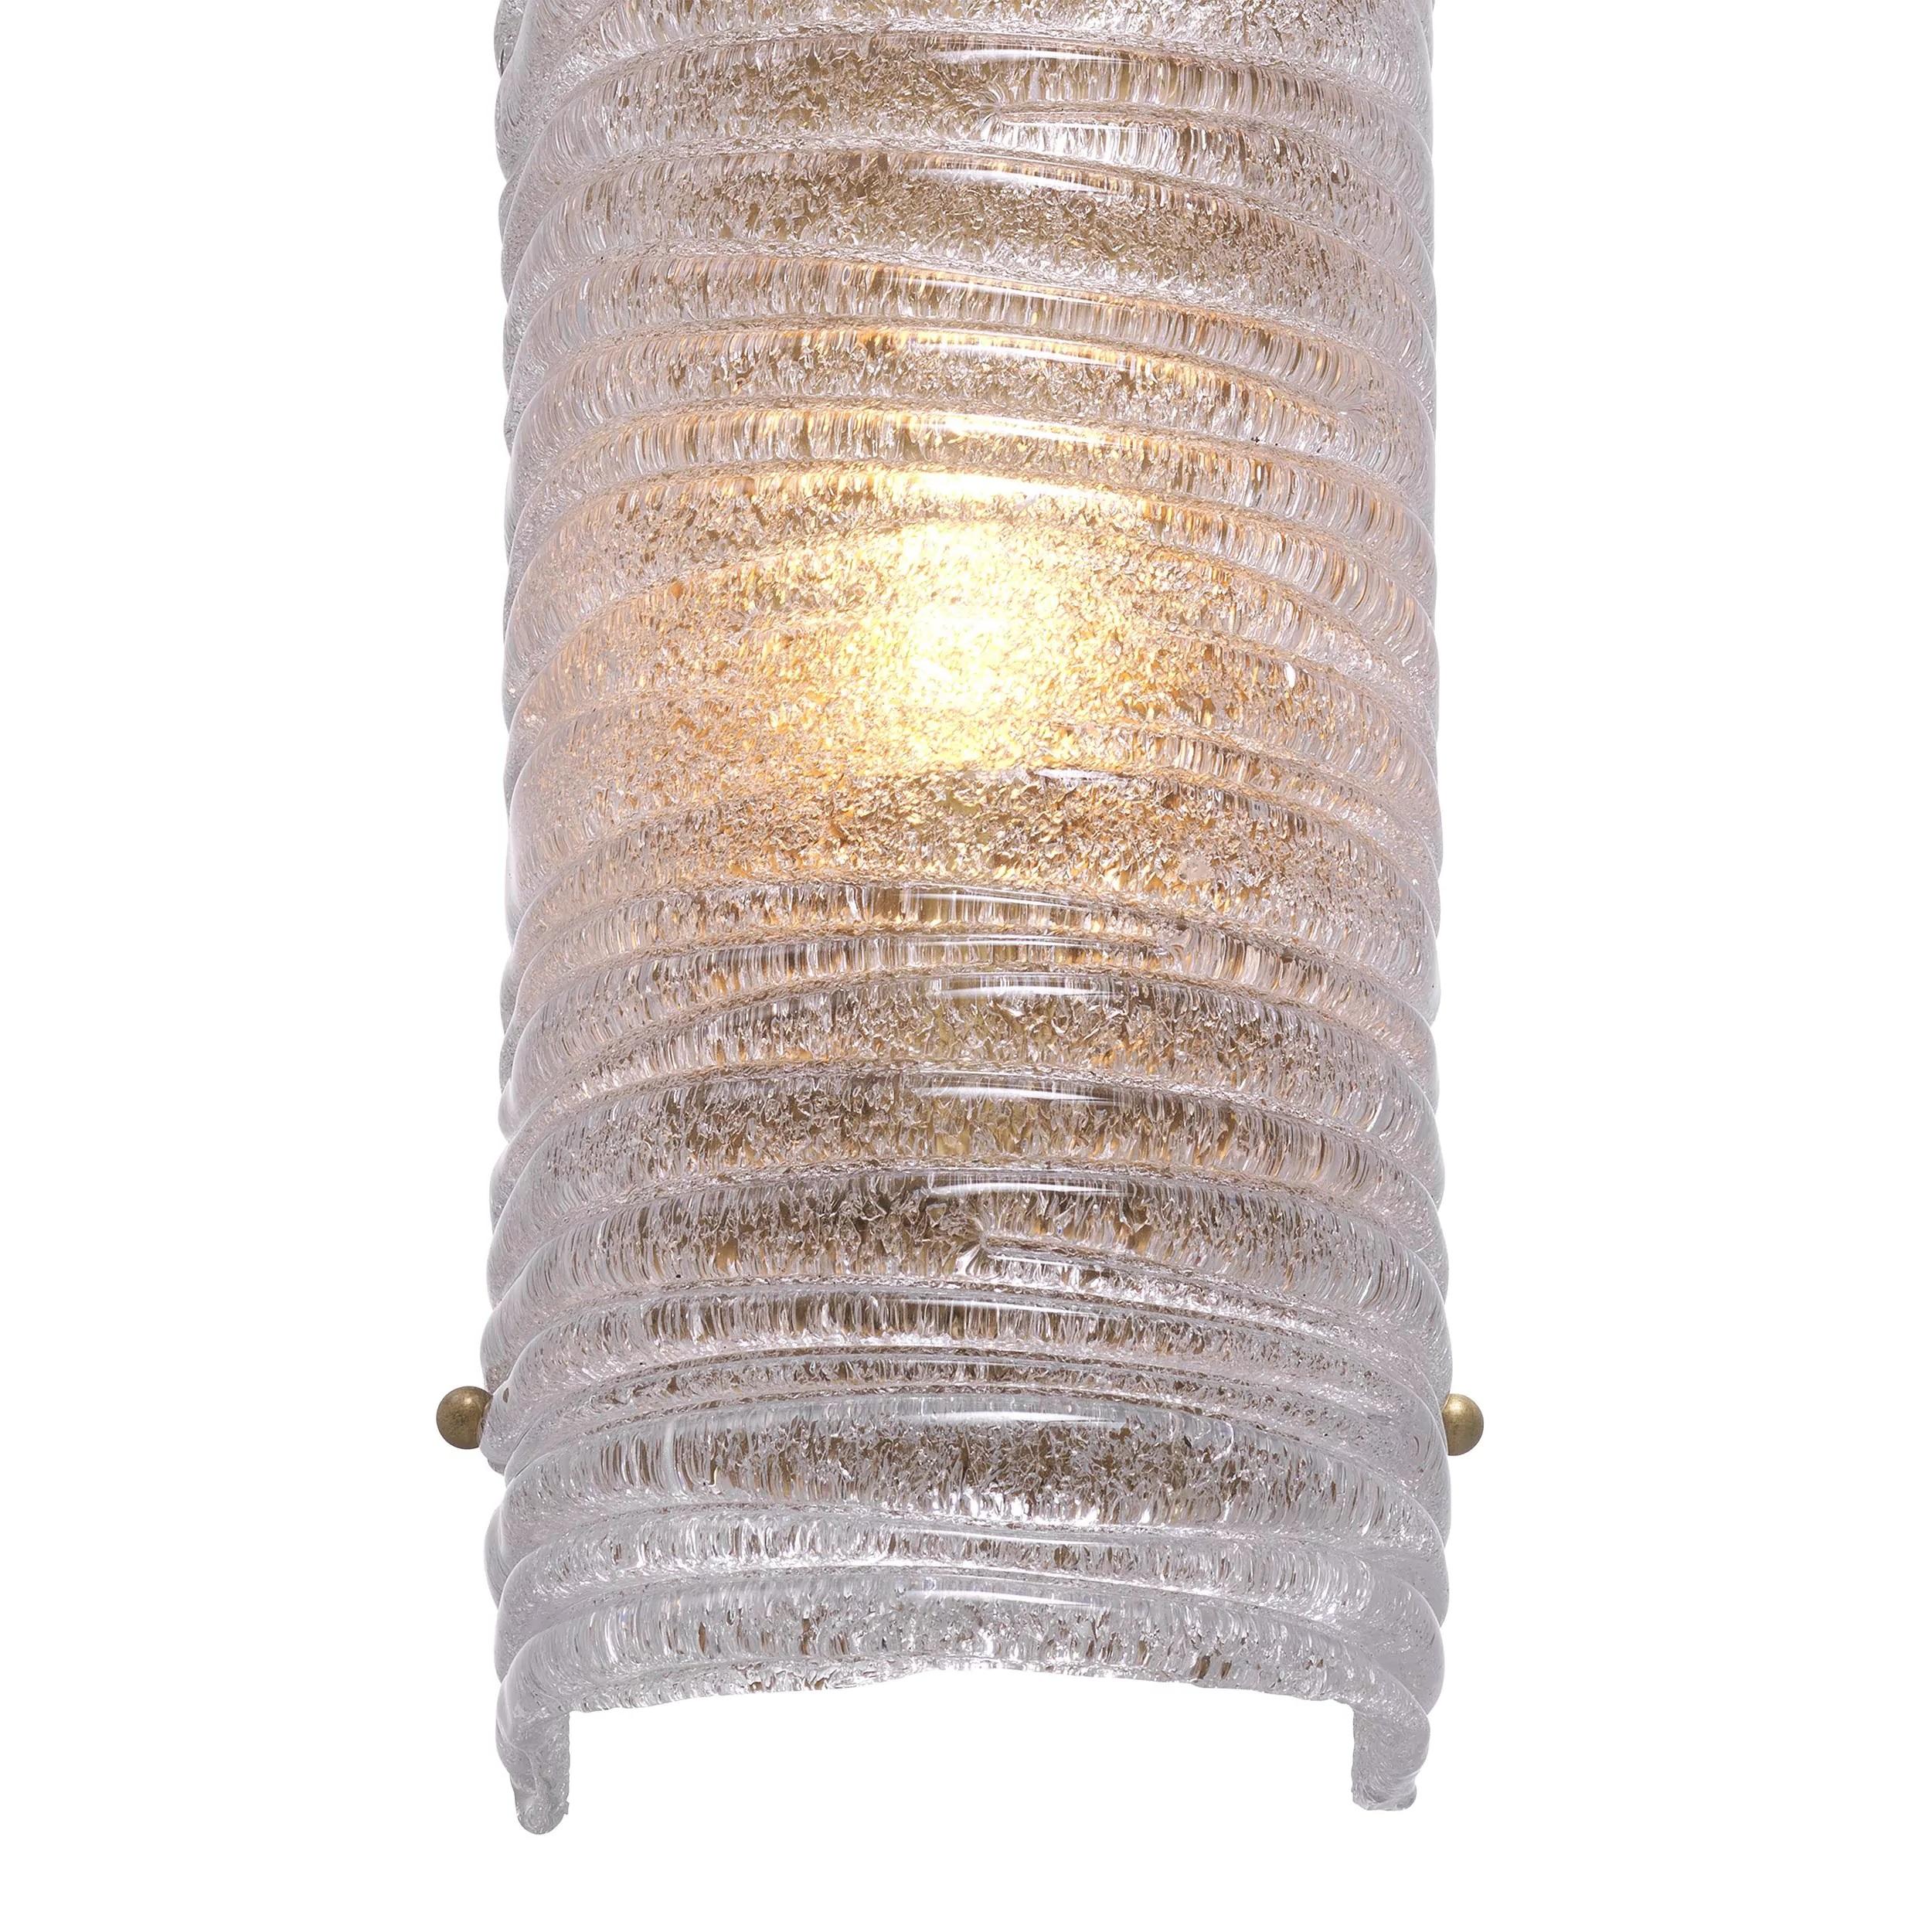 Art Deco Style brass and blown textured glass curved wall light: elegant, presence and class all in transparency. 2 E14 light bulbs required. New item, never used.